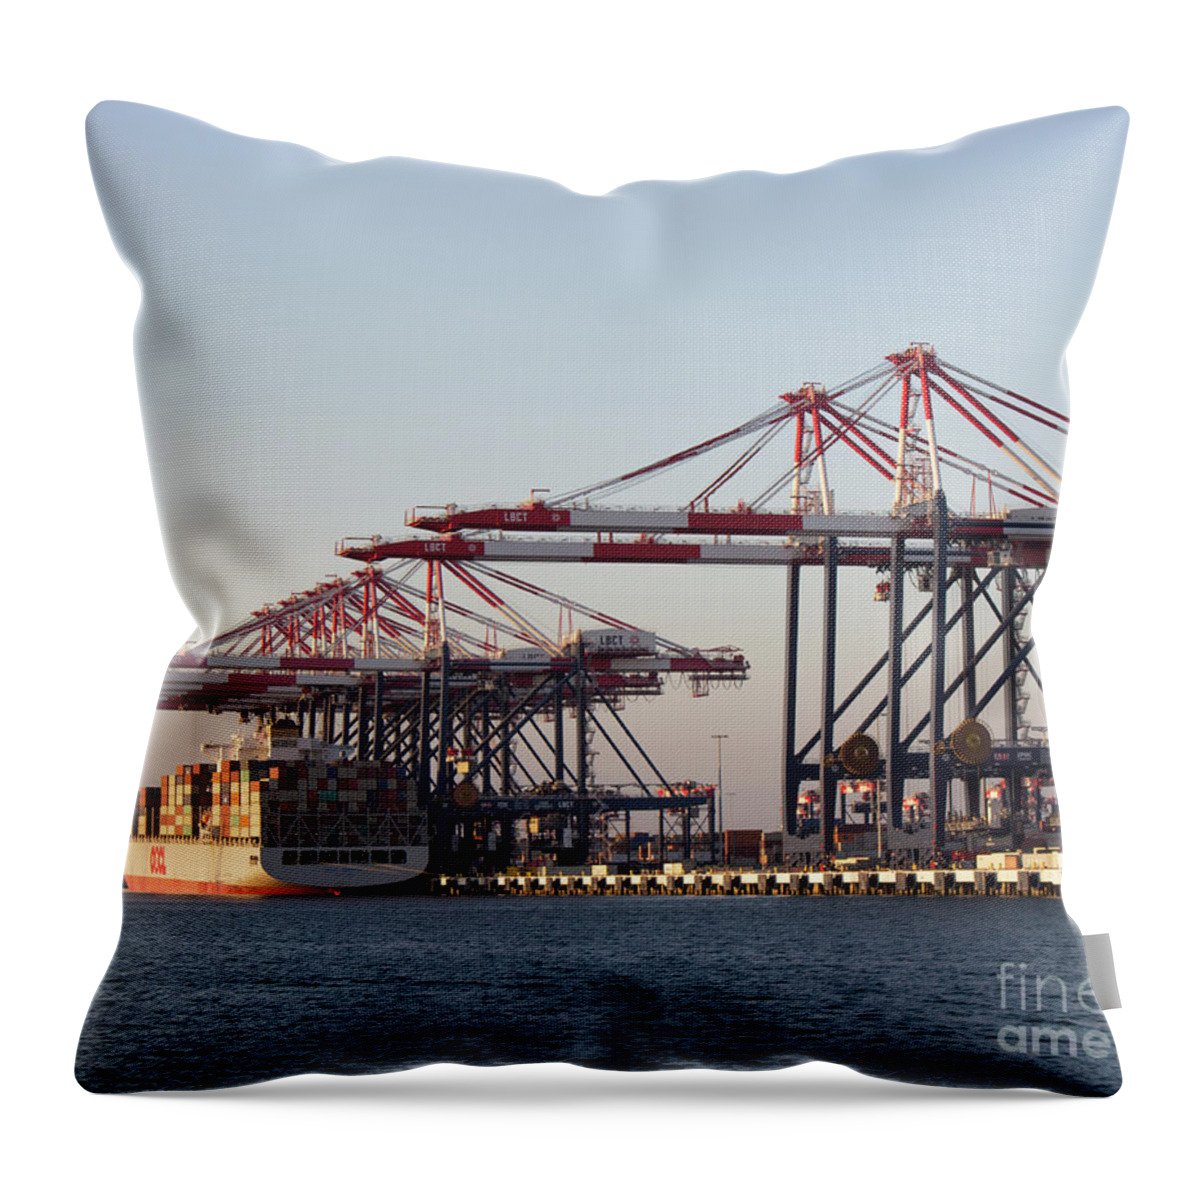 Cranes Throw Pillow featuring the photograph Cranes 2 by Cheryl Del Toro